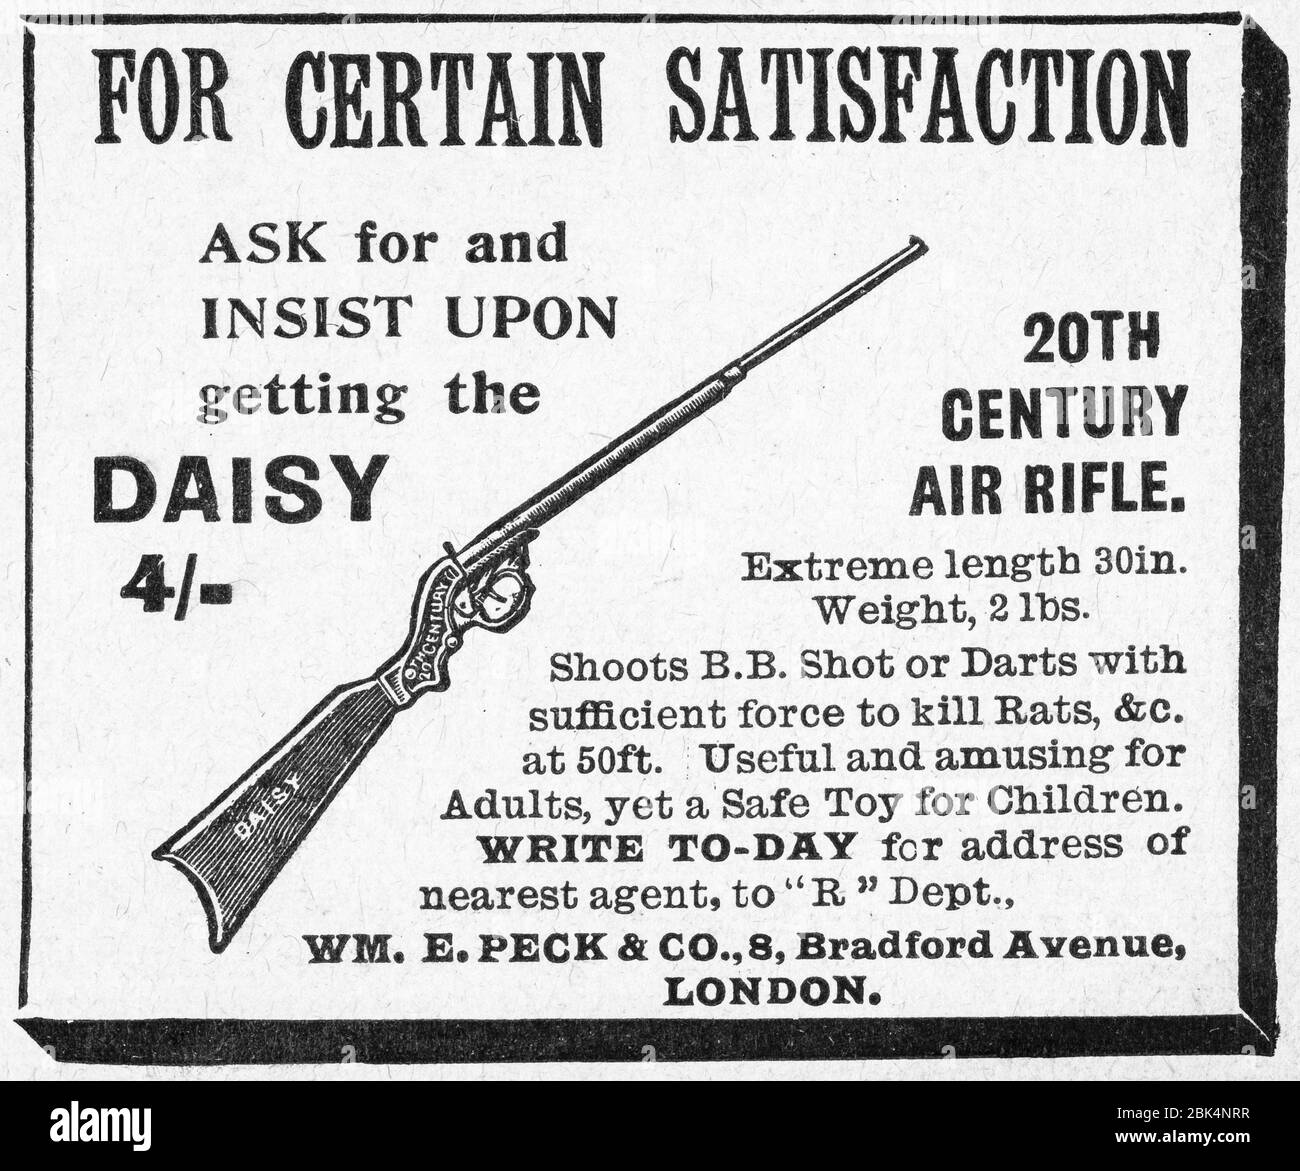 old-daisy-air-rifle-advert-from-the-early-1900s-before-the-dawn-of-advertising-standards-history-of-advertising-old-adverts-advertising-history-2BK4NRR.jpg